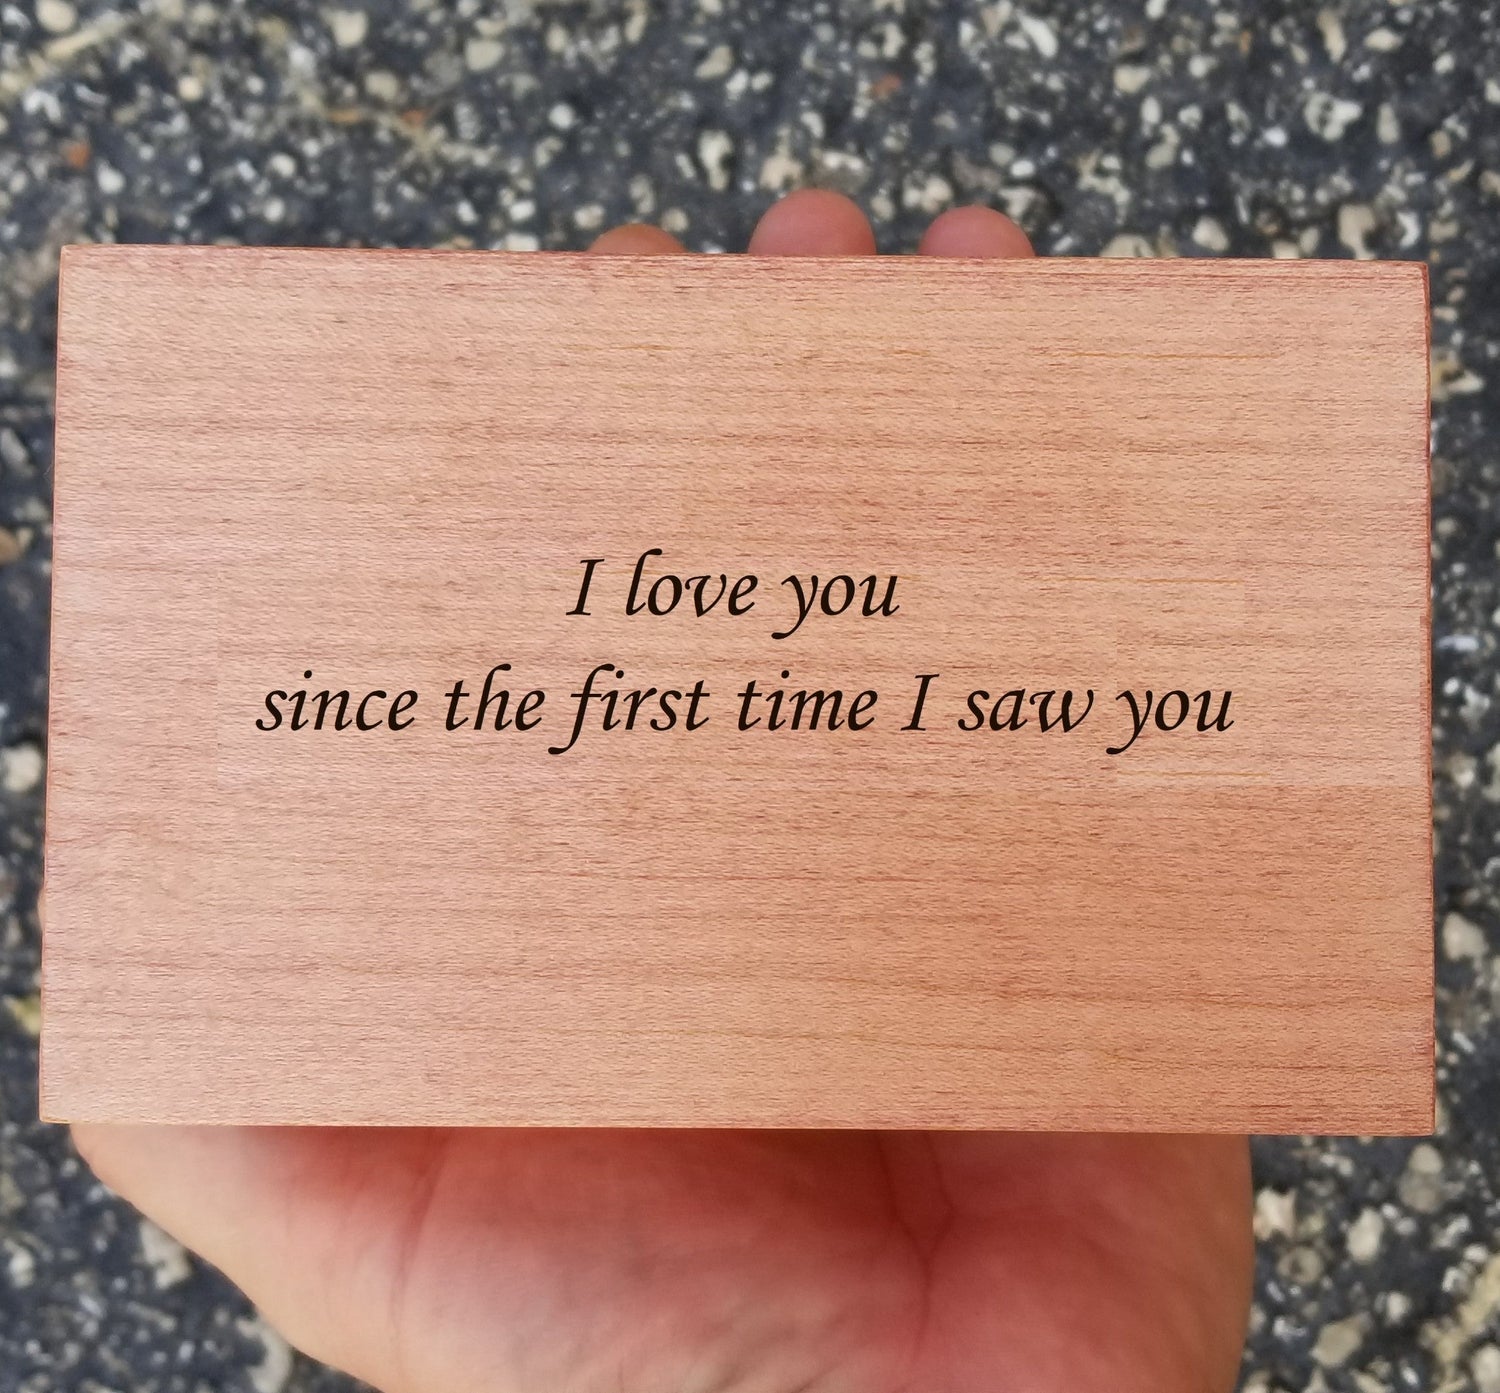 customized jewelry box with engraving and song